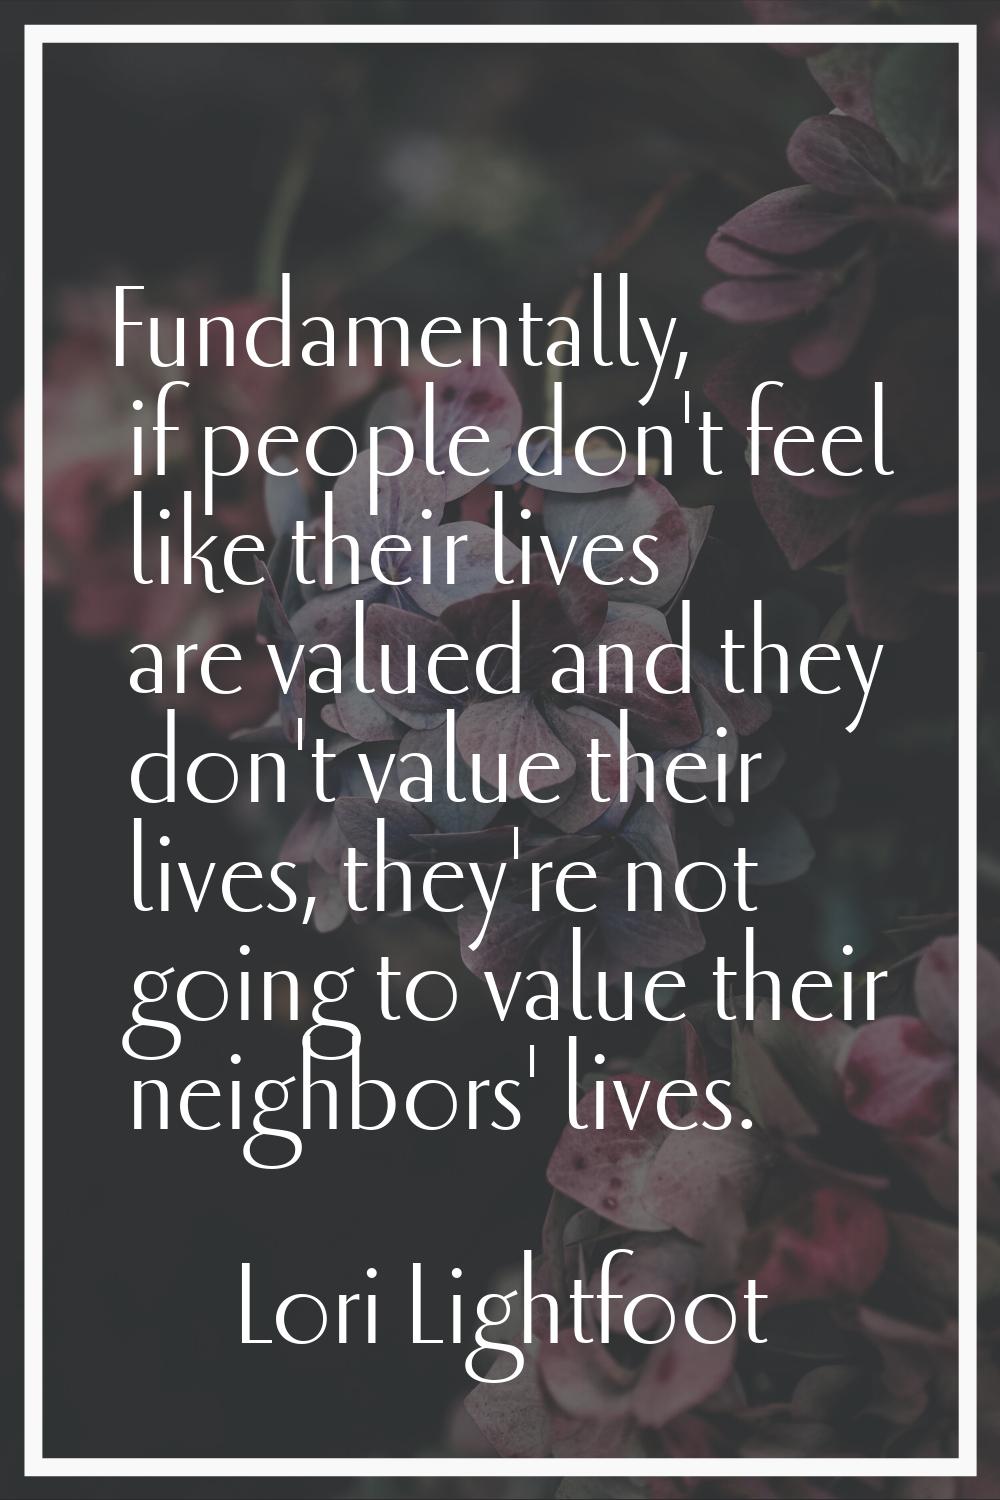 Fundamentally, if people don't feel like their lives are valued and they don't value their lives, t